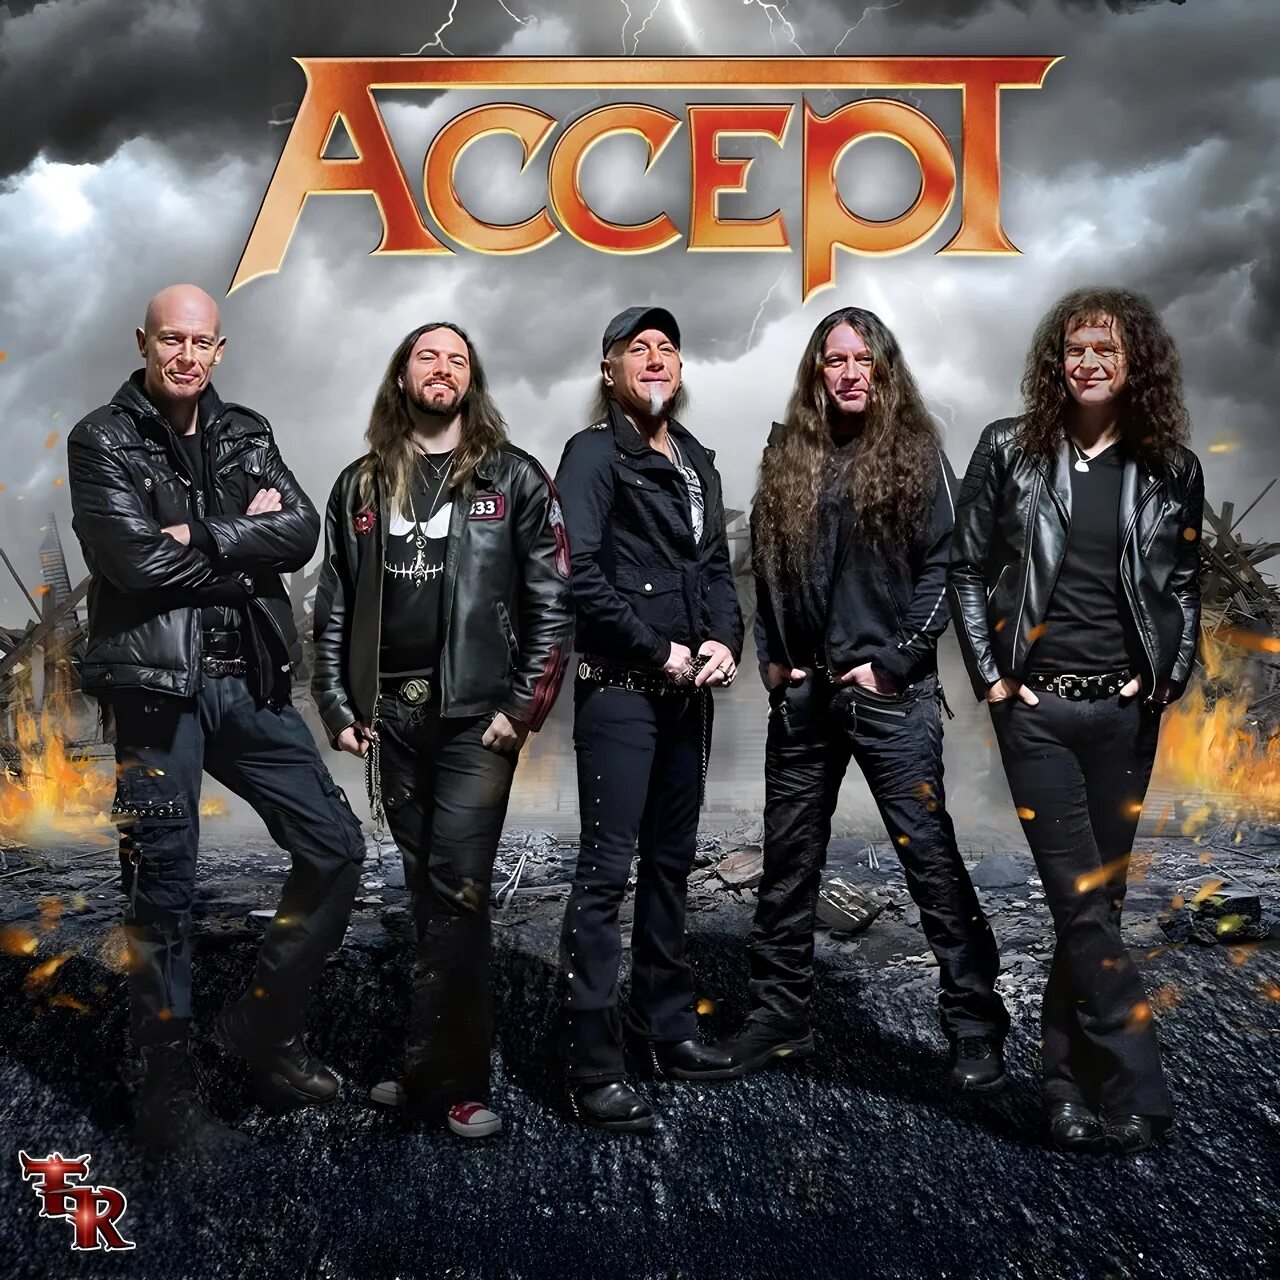 Accept full. Accept the Rise of Chaos 2017. Accept 2017 the Rise of Chaos обложка. Группа accept 2019. Группа accept обложки.